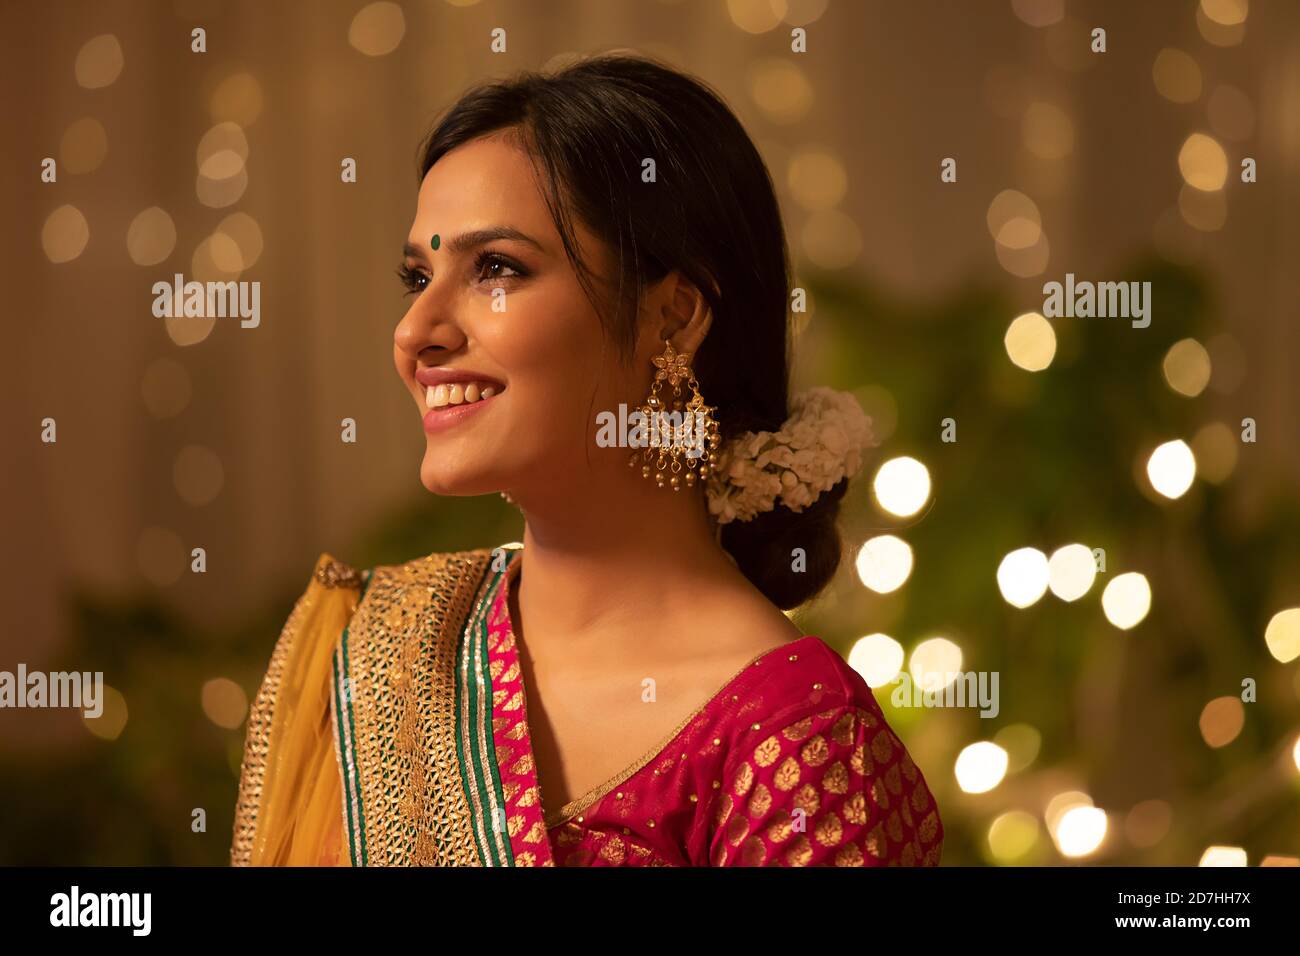 Beautiful woman with bright eyes and vibrant smile, dressed for diwali Stock Photo